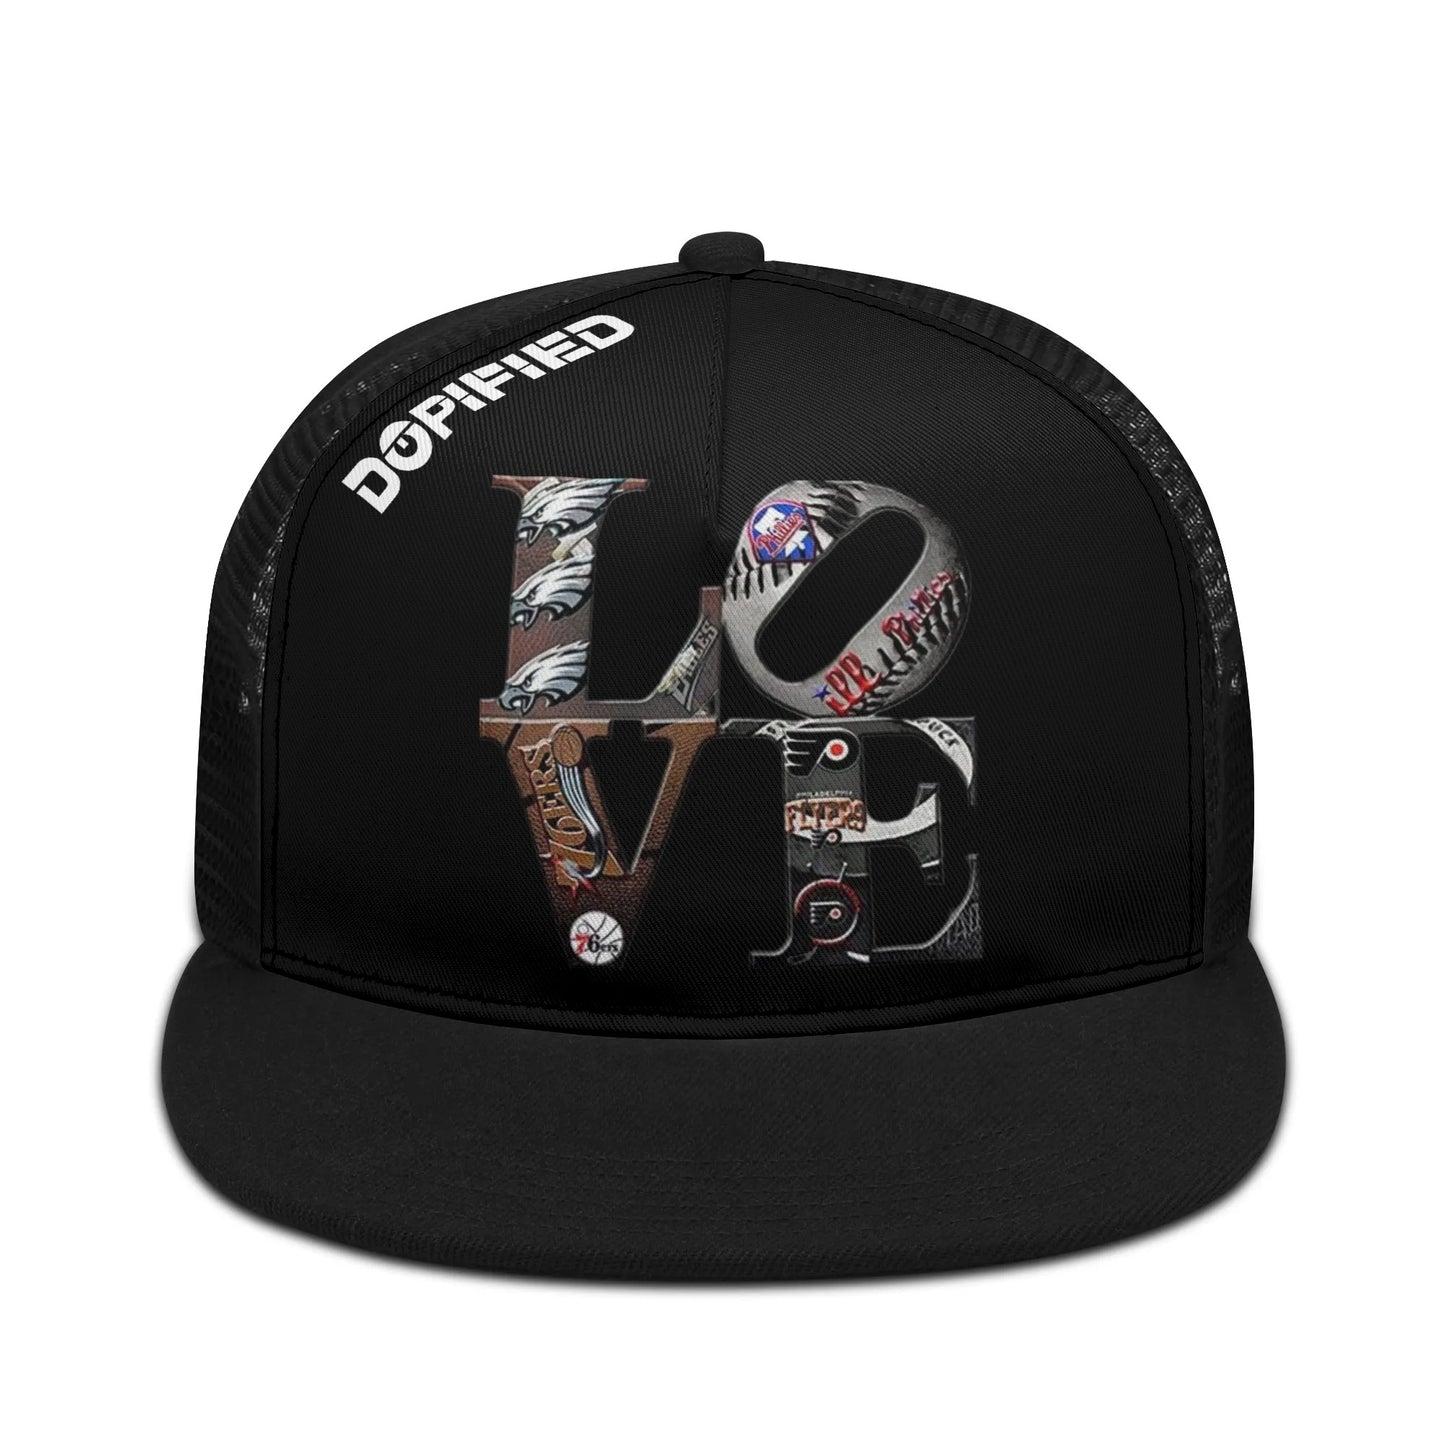 Philly Brotherly Love Adjustable Snapback Trucker Hat DOPiFiED Edition